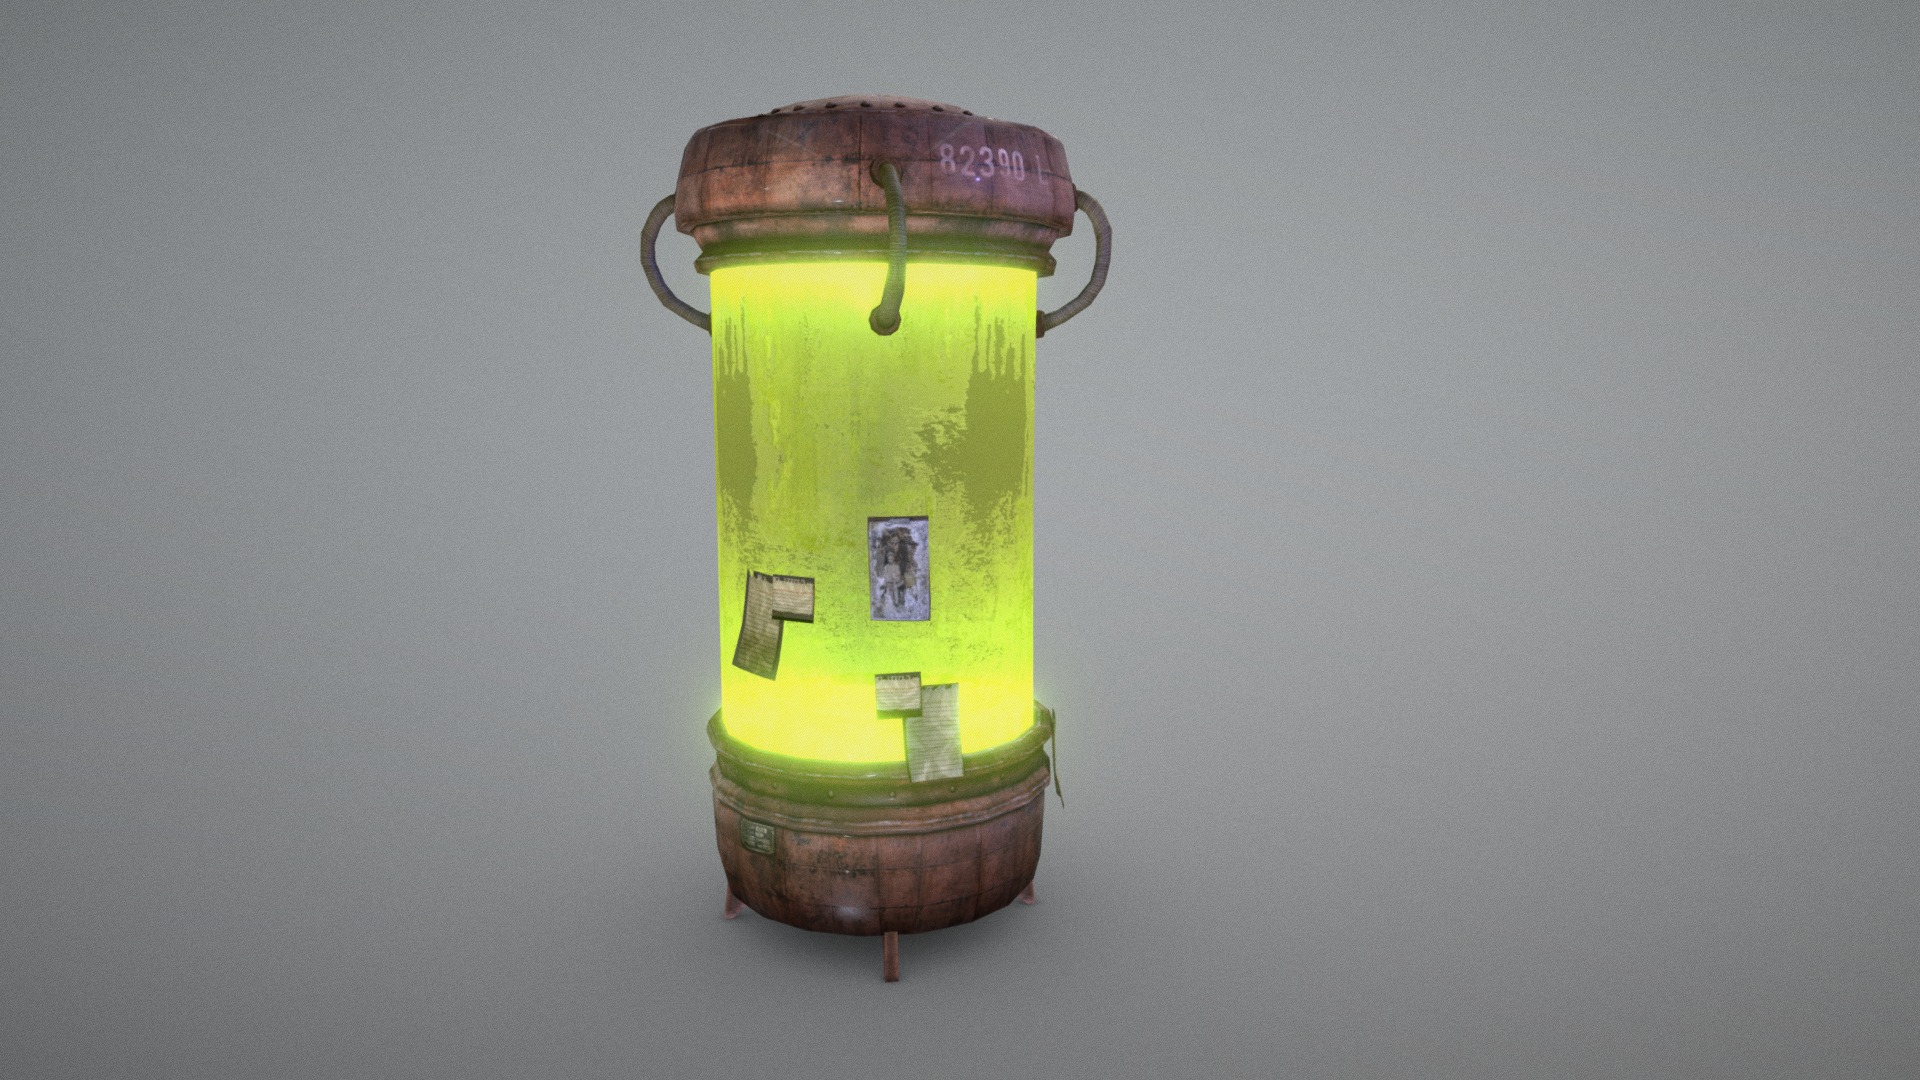 The idea for this model was from my first 3d assignment &ldquo;Abandoned Laboratory